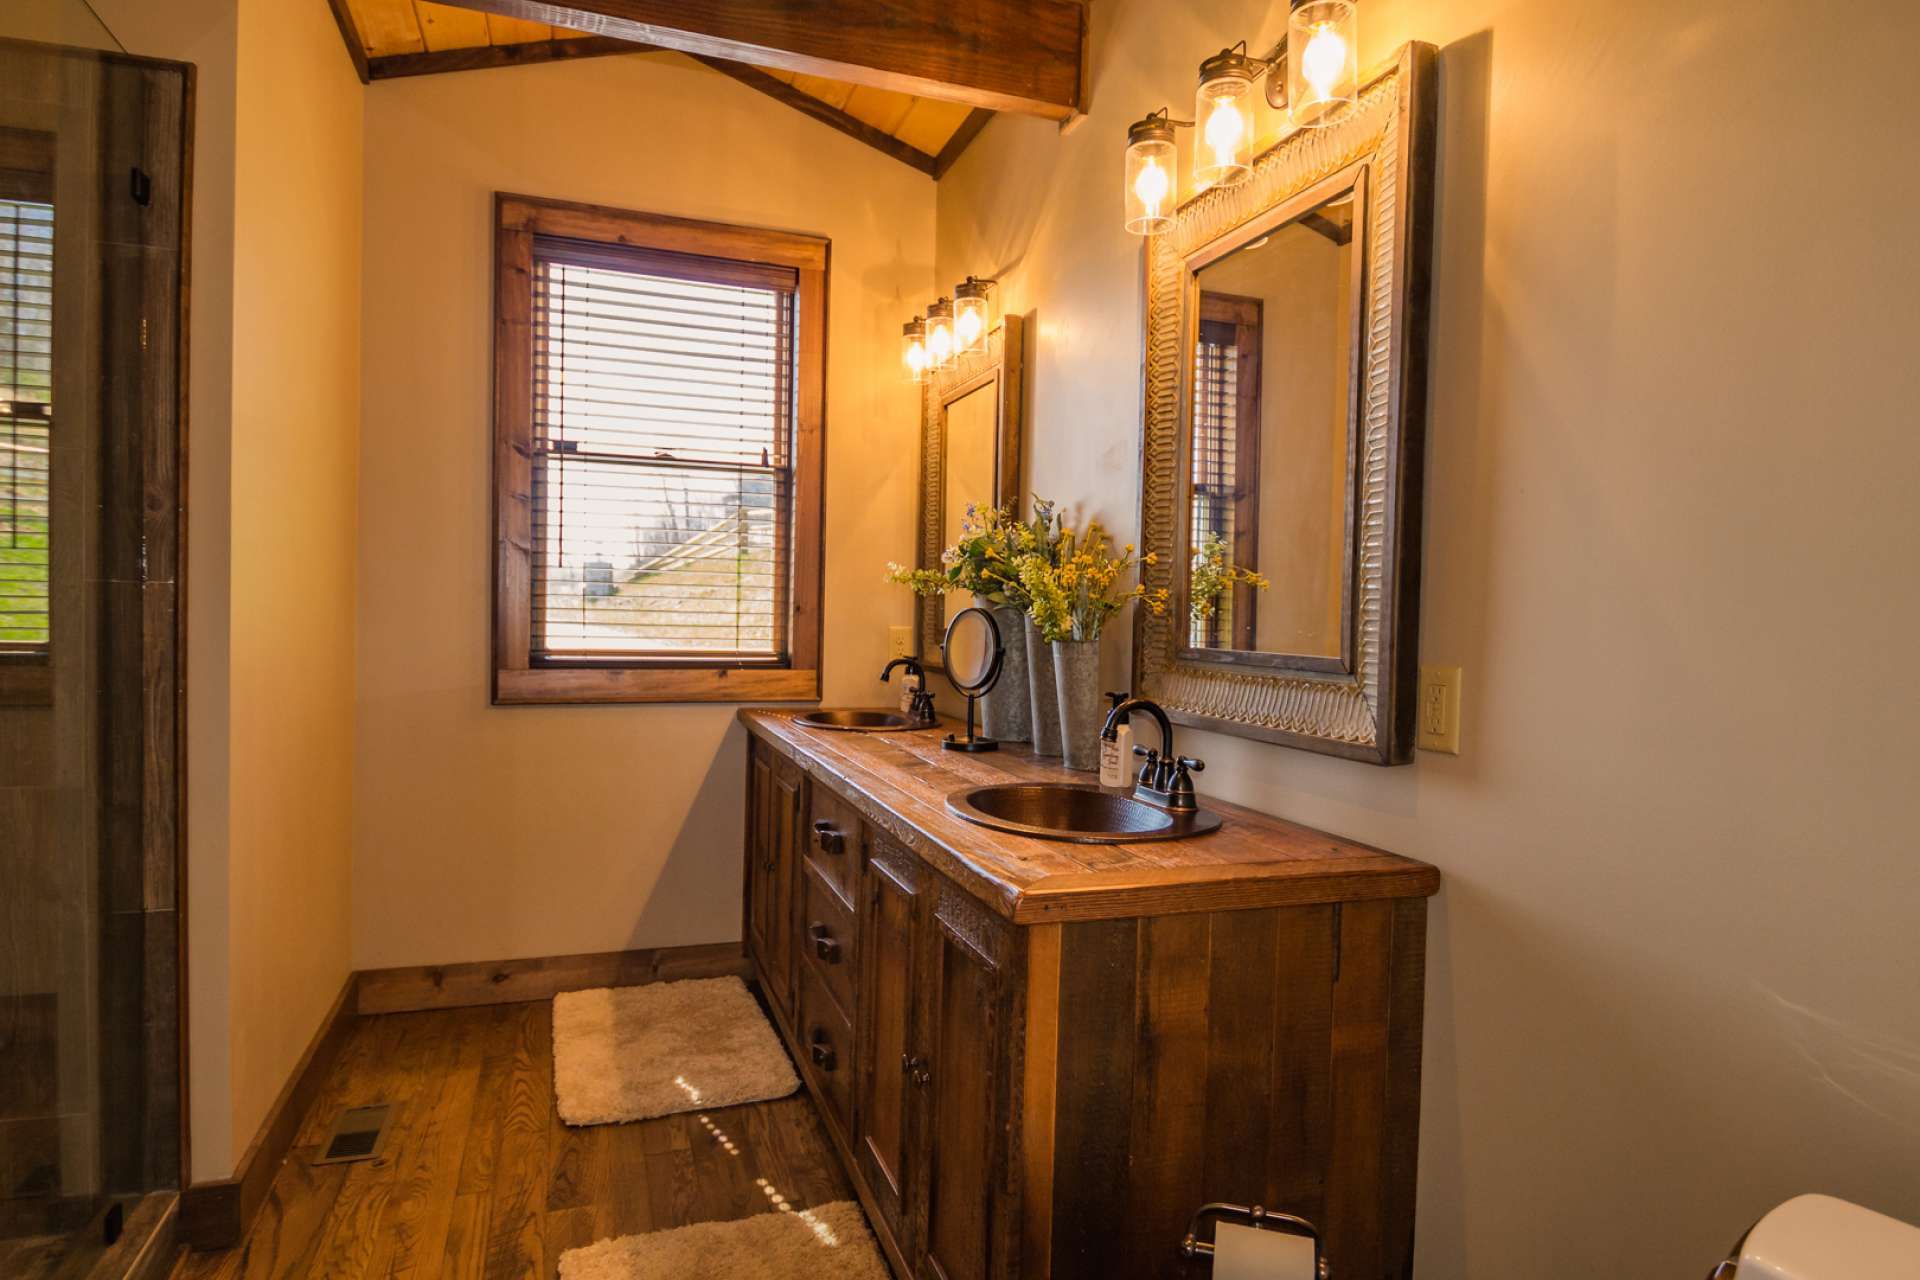 The master bath offers a walk-in tiled shower and a double vanity.  Also notice the architectural accents.